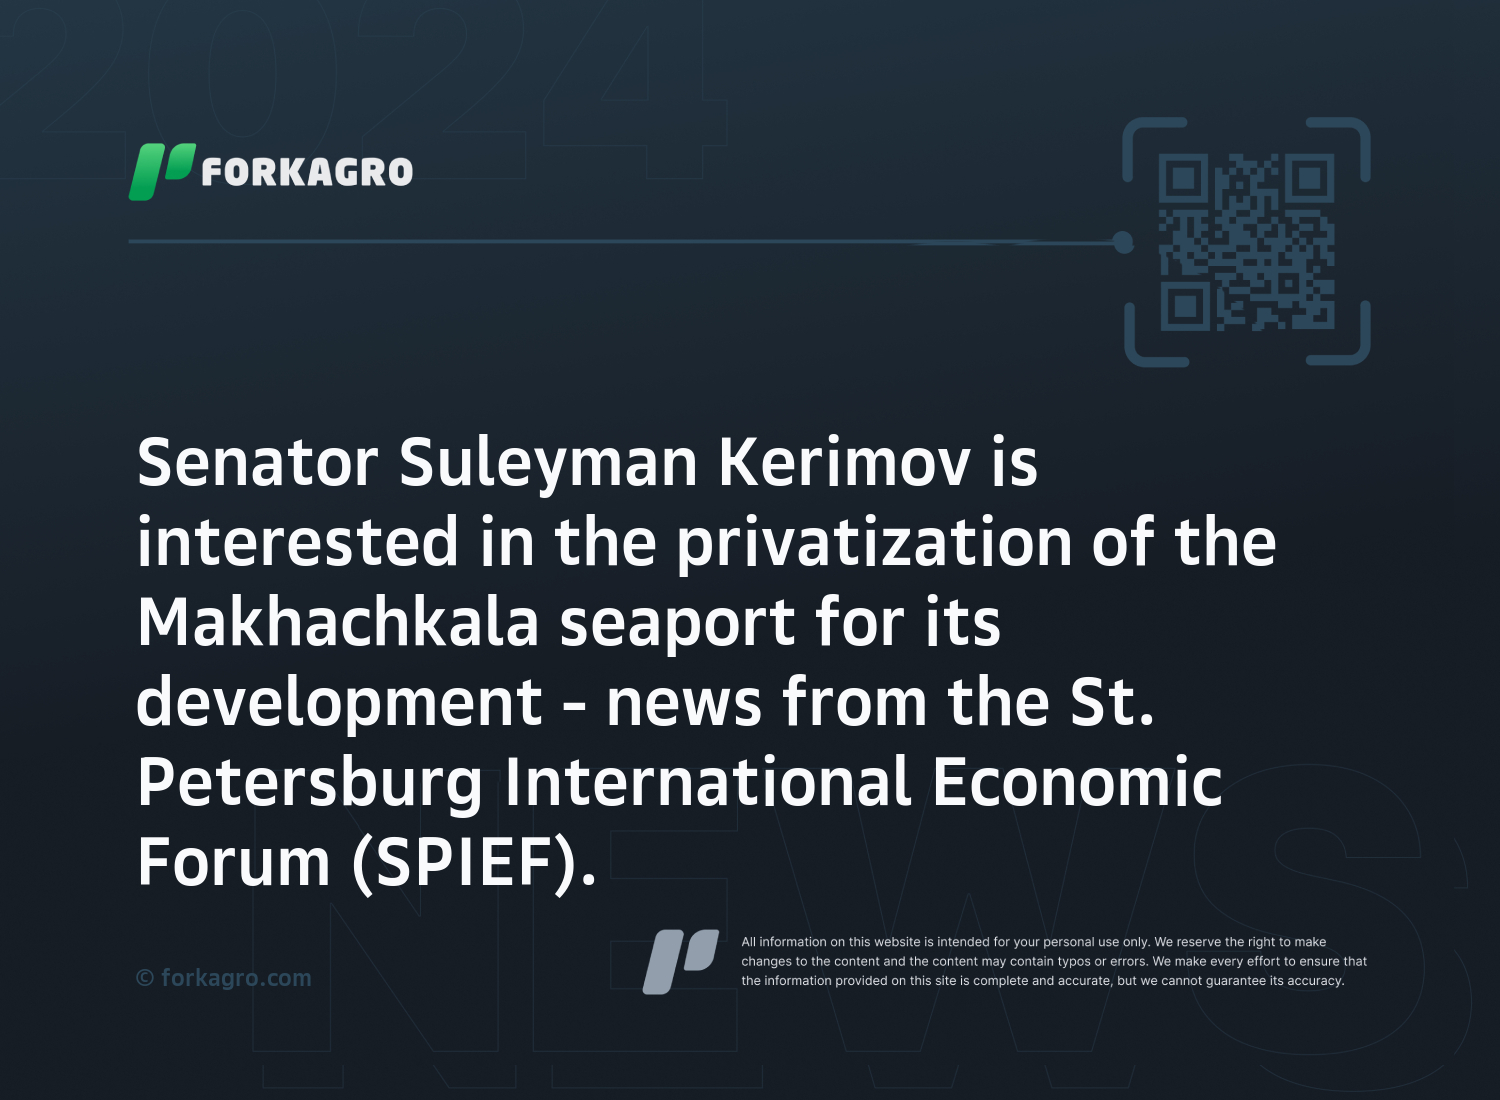 Senator Suleyman Kerimov is interested in the privatization of the Makhachkala seaport for its development - news from the St. Petersburg International Economic Forum (SPIEF).